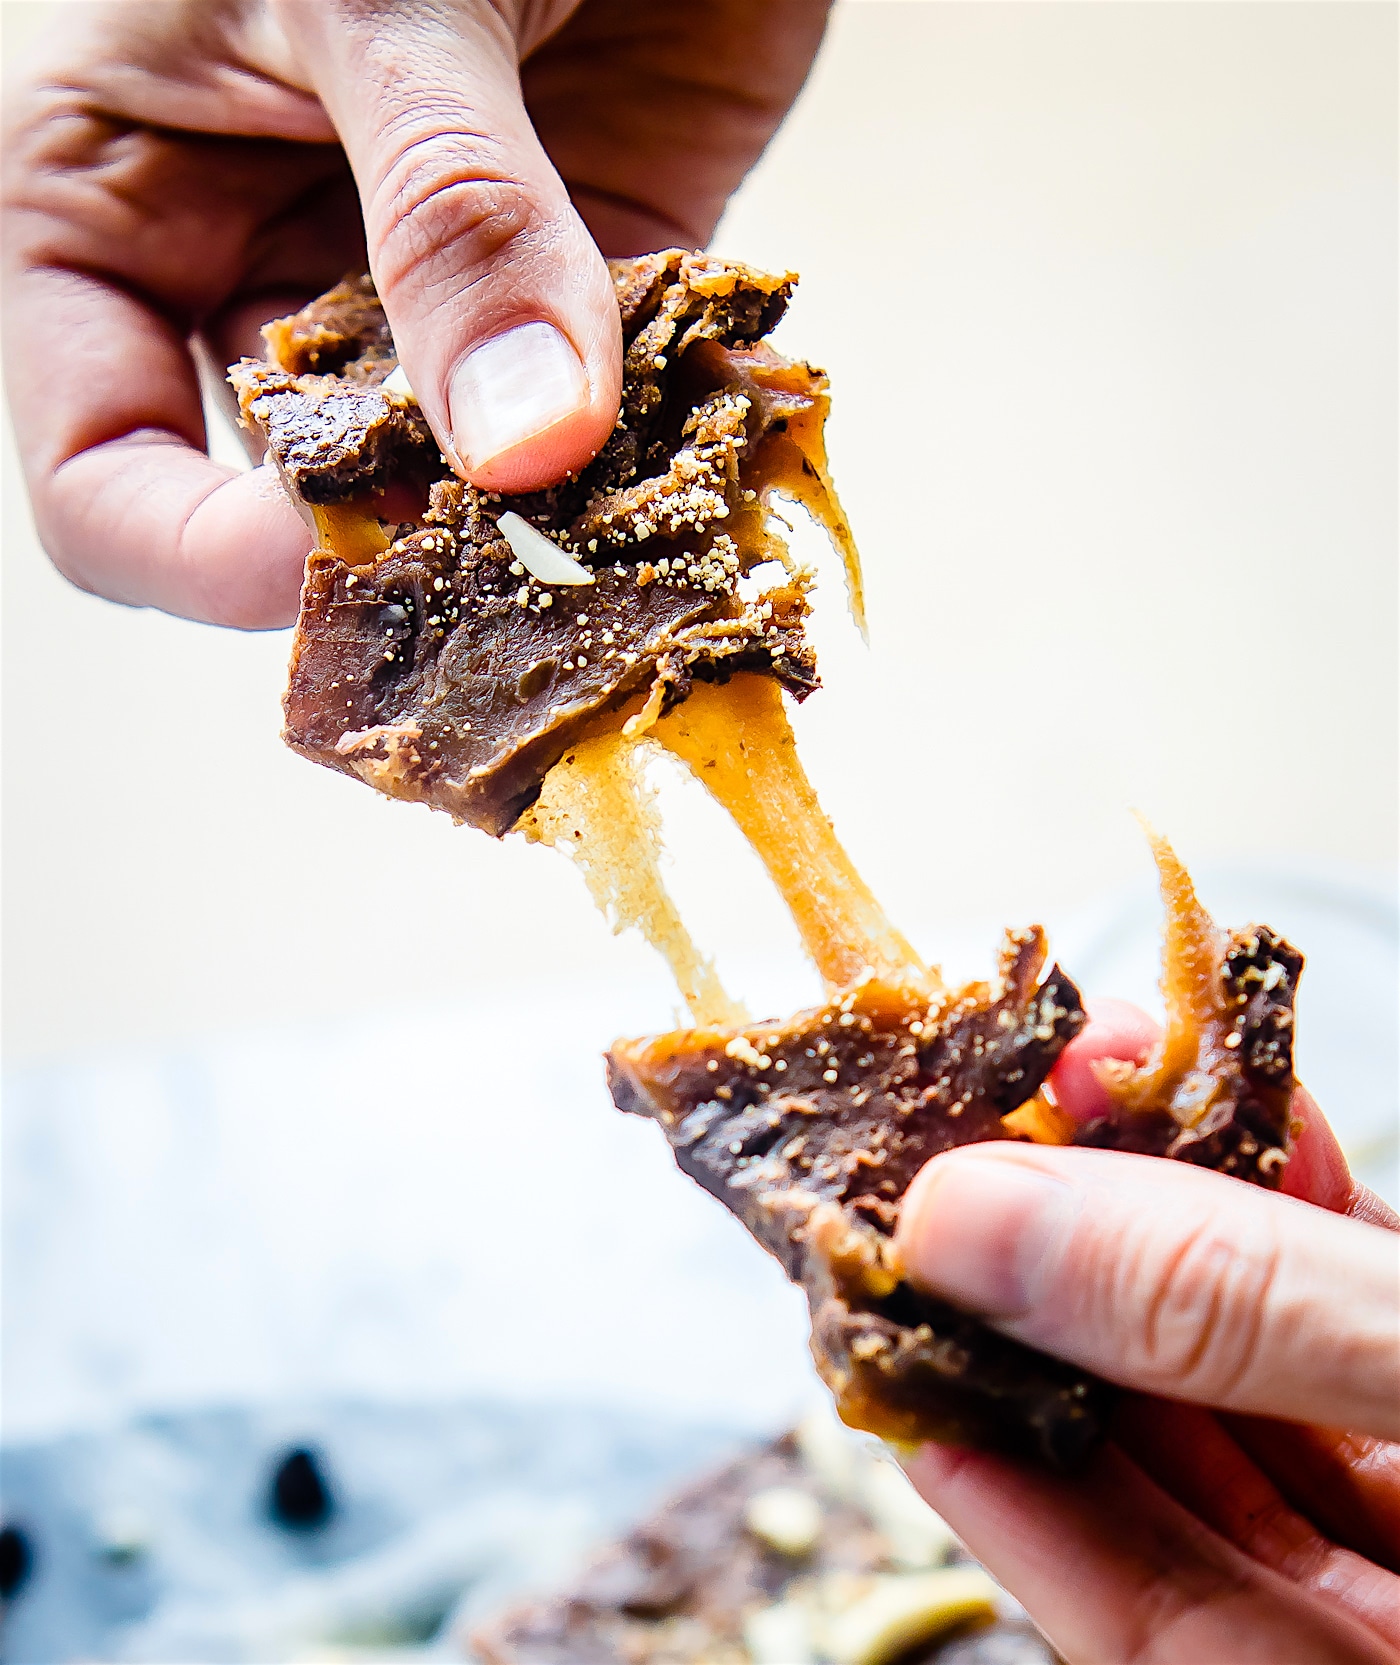 Paleo Toffee made with just 5 simple ingredients and EASY to make! Real butter, maple syrup, dark chocolate, and more. The perfect Maple Paleo Toffee treat to get you through the Holidaysâ¦ okay itâs just good ANYTIME! Healthier gluten free treats to love and share. 